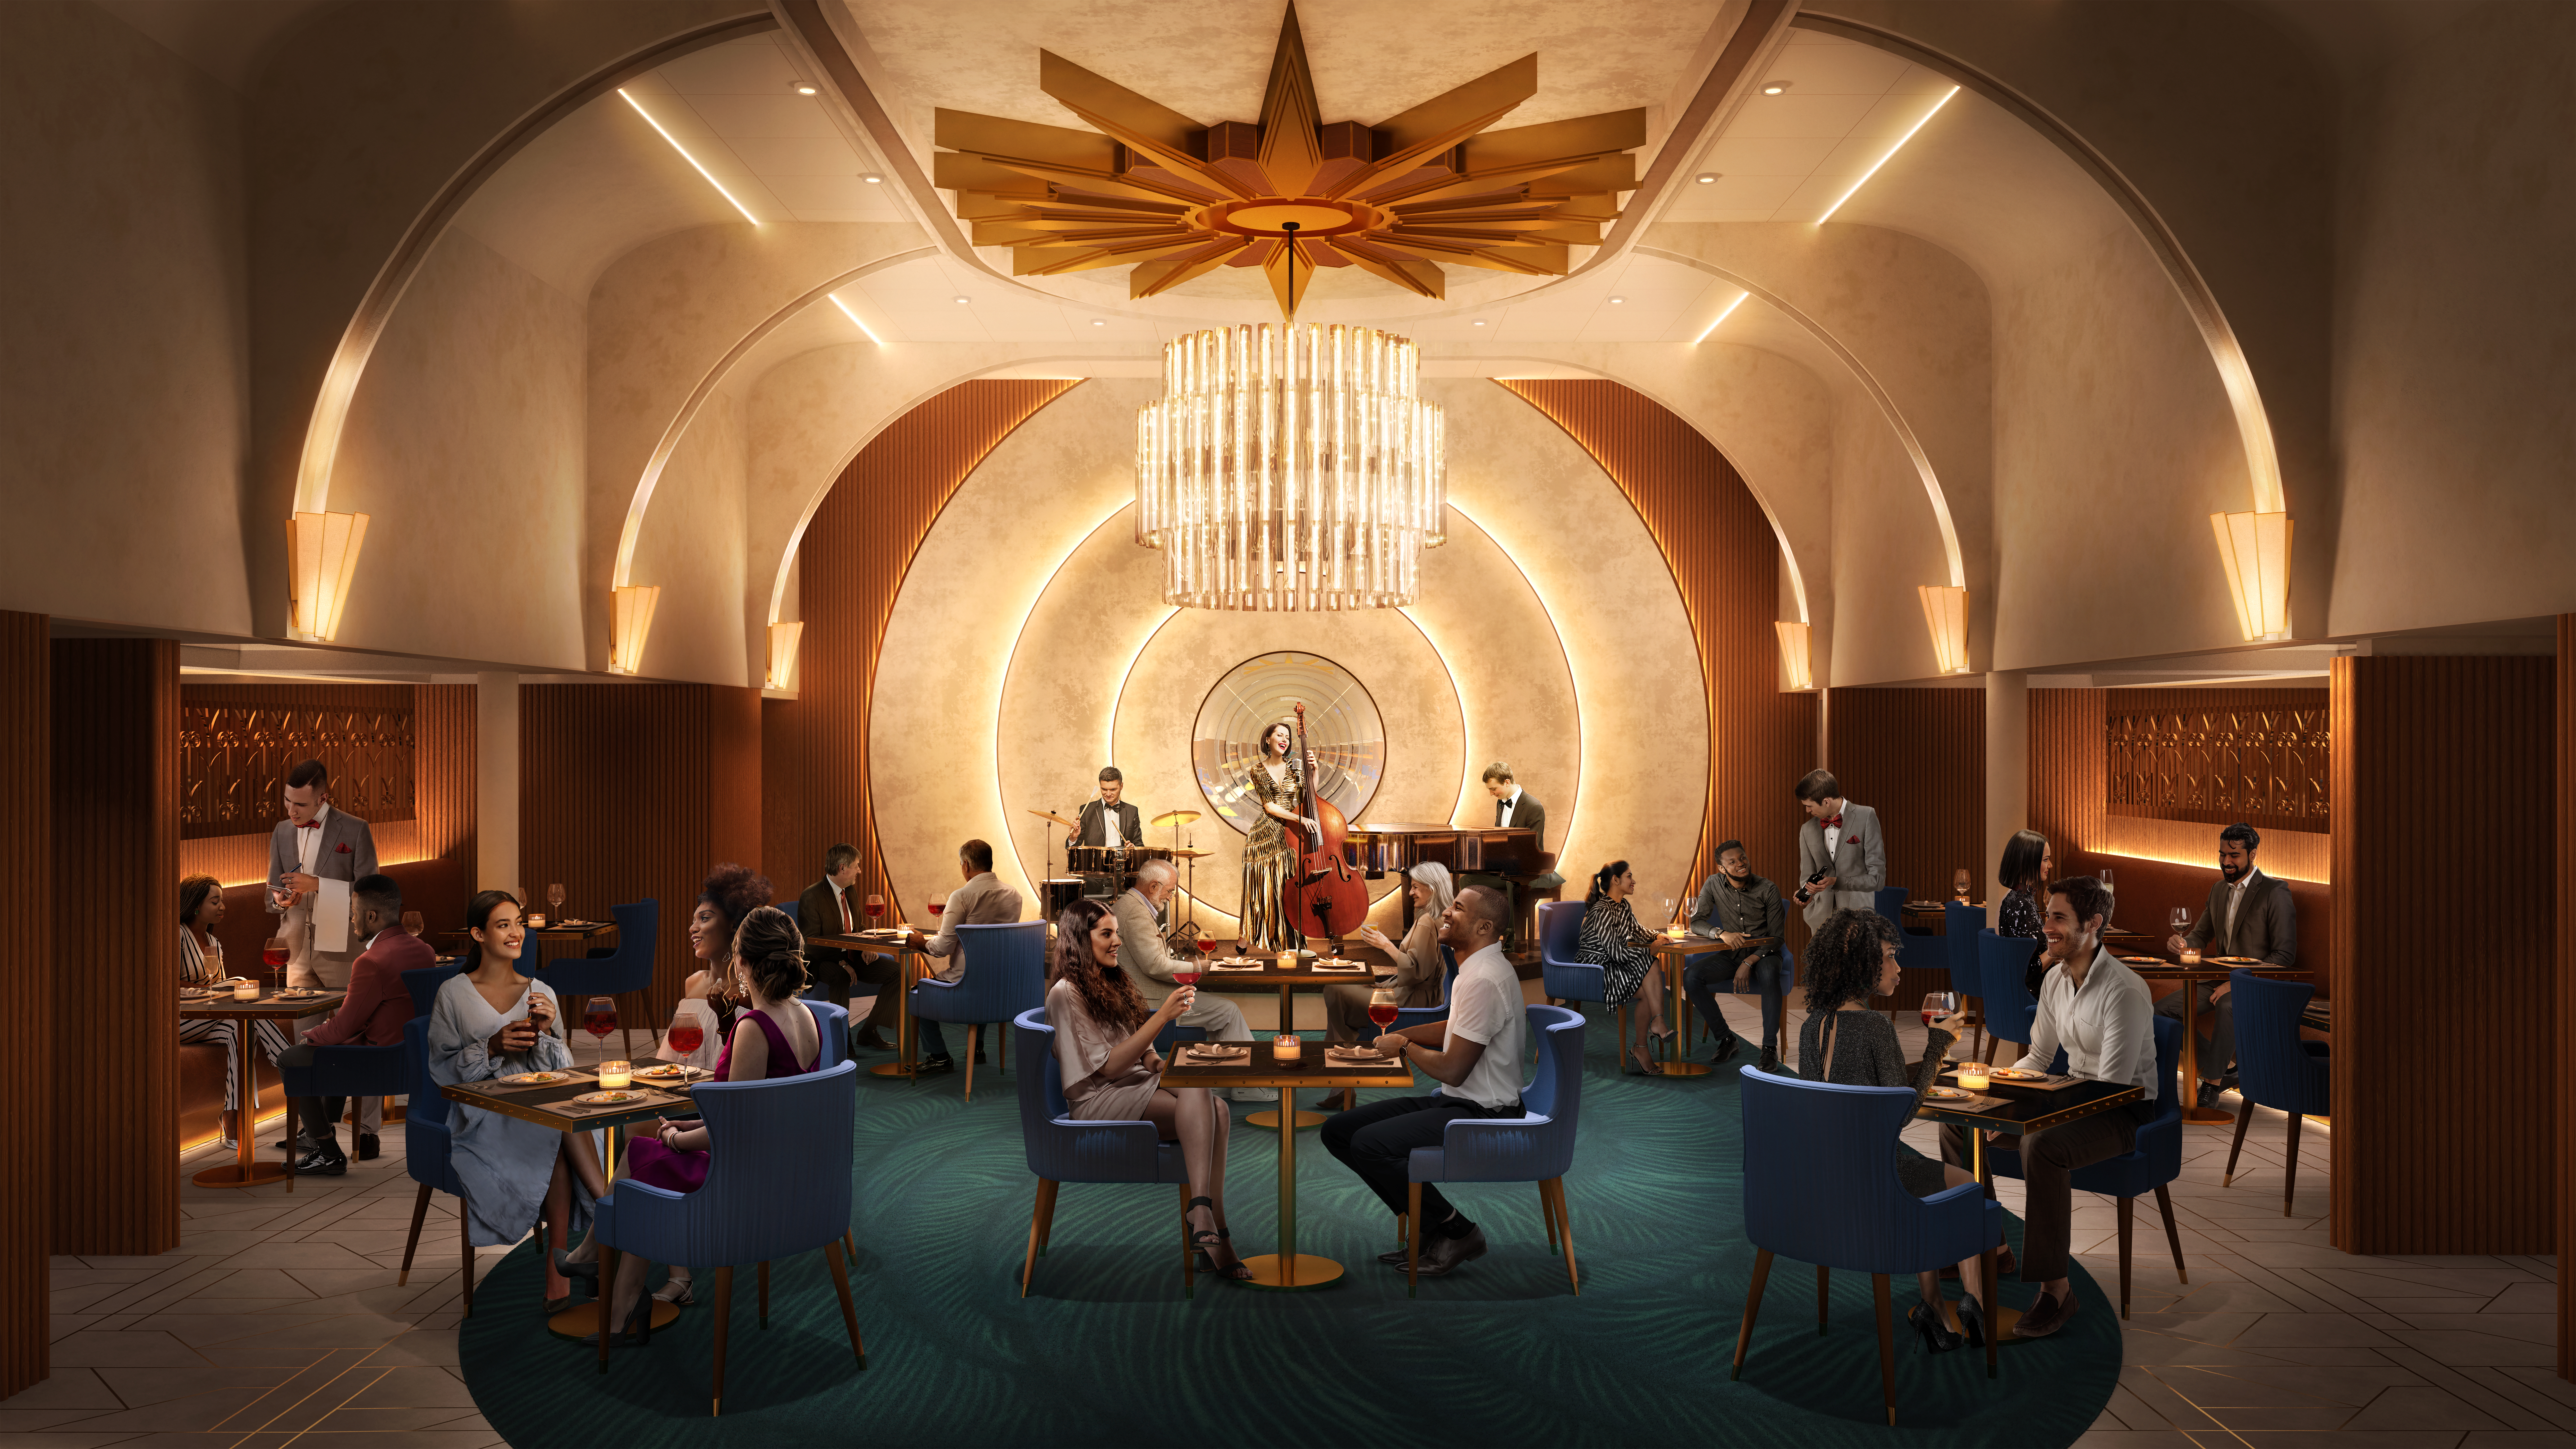 Royal Caribbean’s Icon Of The Seas Ups The Ante And Appetite With New, Reimagined Dining. More than 20 Choices for Every Occasion Include a New Eight-Course Experience and the Cruise Line’s First Food Hall   (Image at LateCruiseNews.com - May 2023)